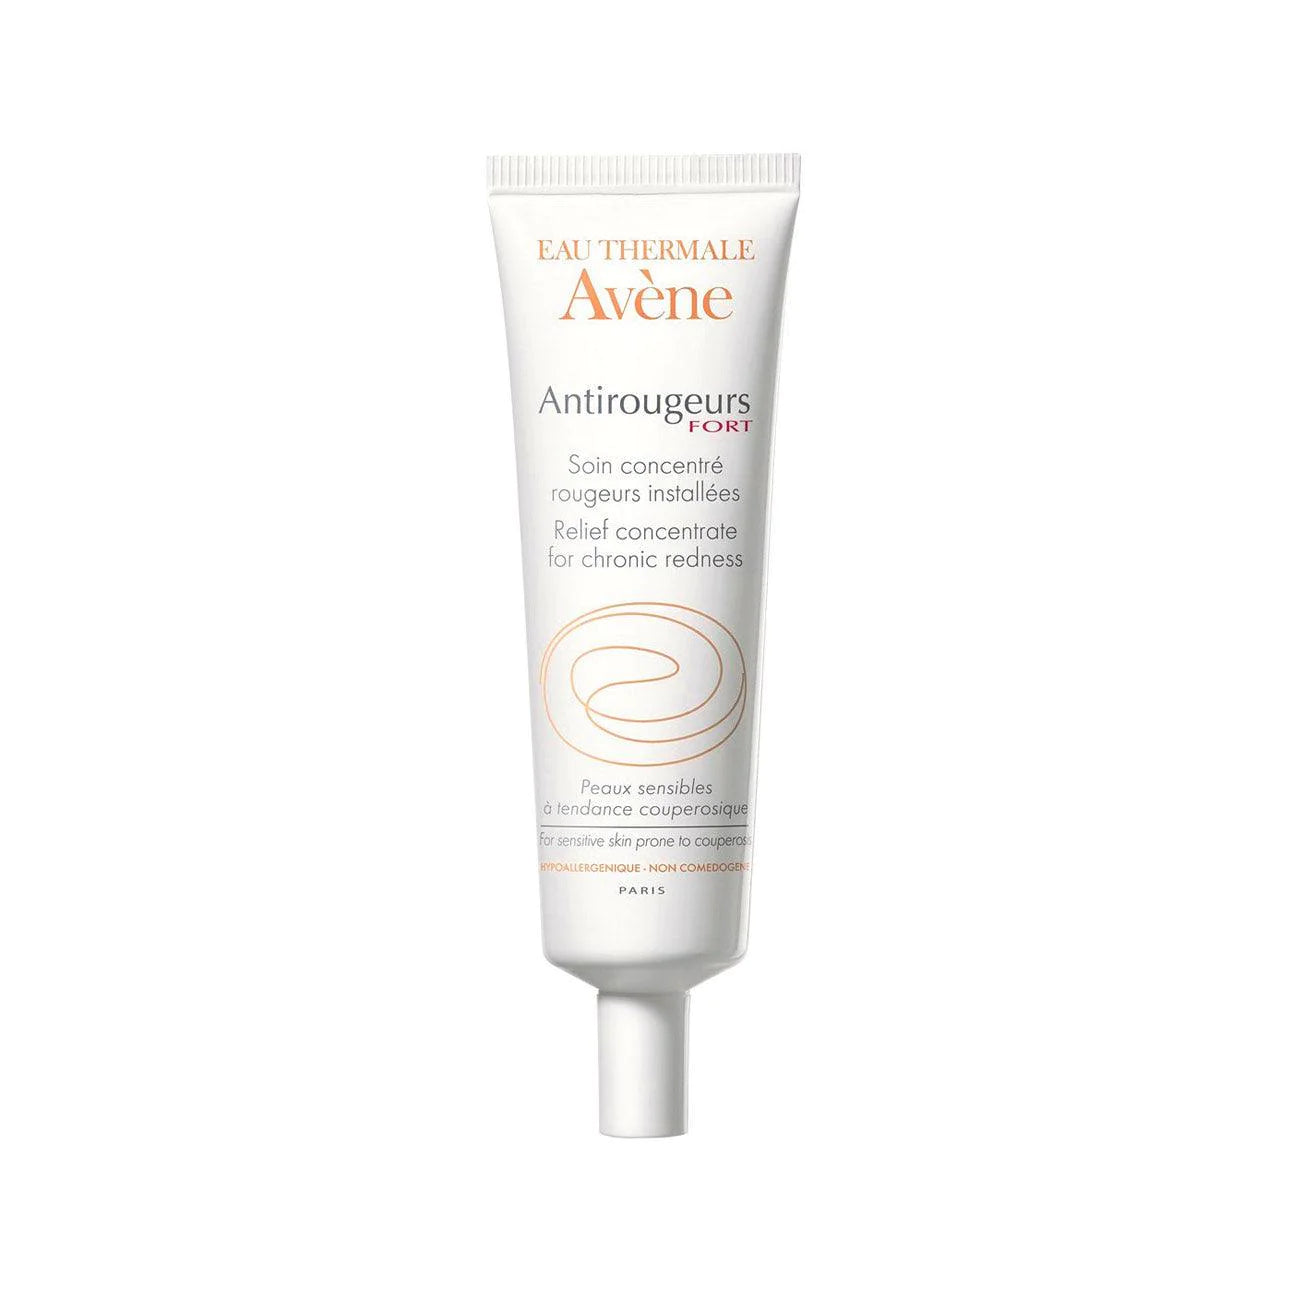 AVÈNE Antirougeurs Fort Relief Concentrate for Chronic Redness - Sensitive Skin Prone to Couperosis